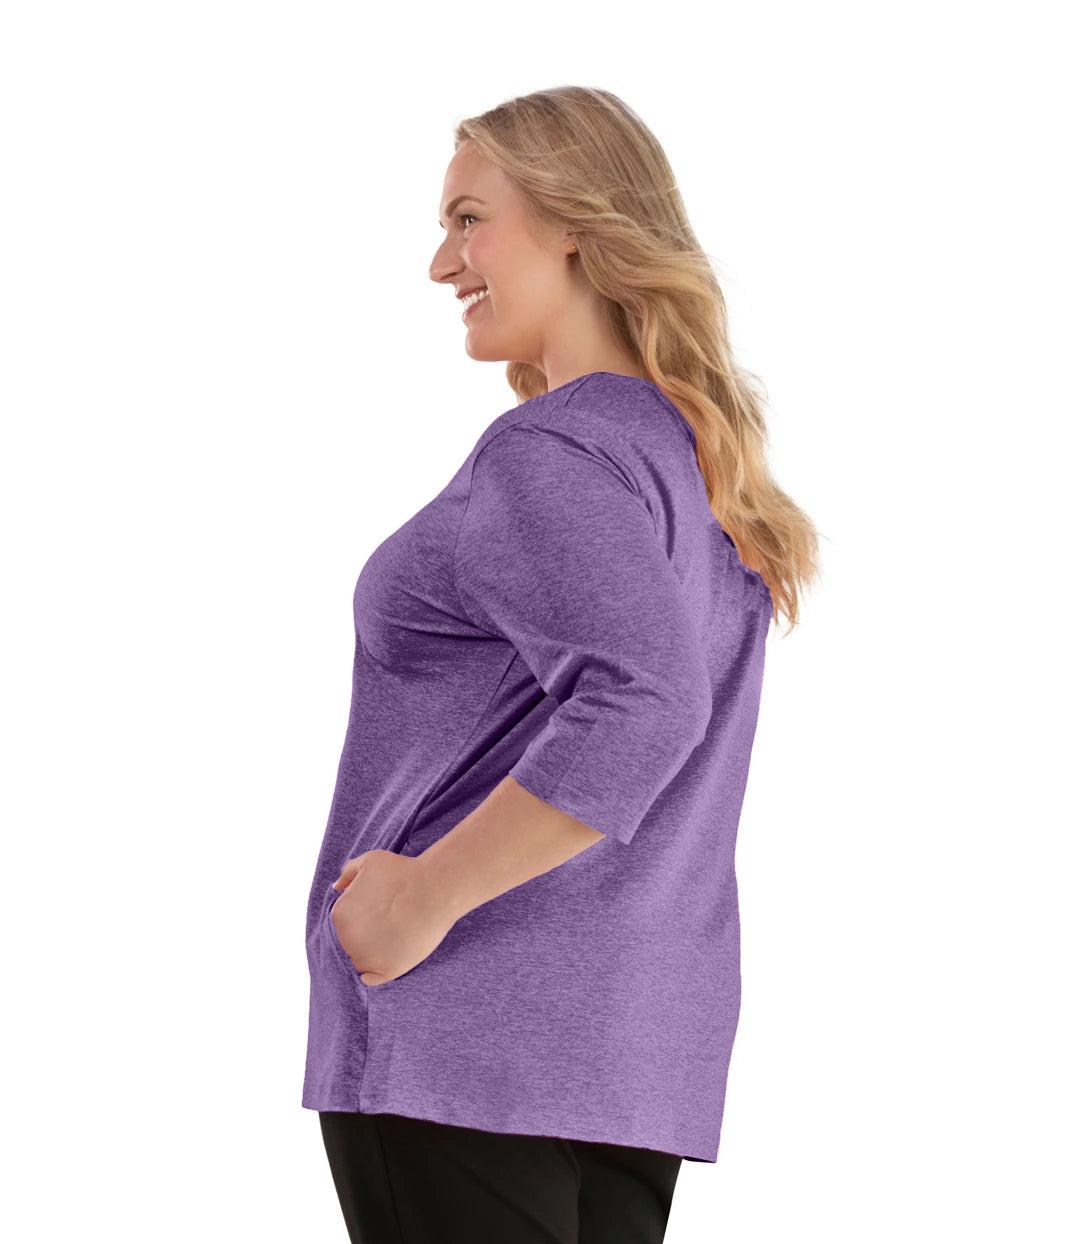 Plus size woman, facing left, wearing JunoActive plus size SoftWik V-Neck ¾ Sleeve Top with Pockets in the color Heather Amethyst. She is wearing JunoActive Plus Size Leggings in the color Black.